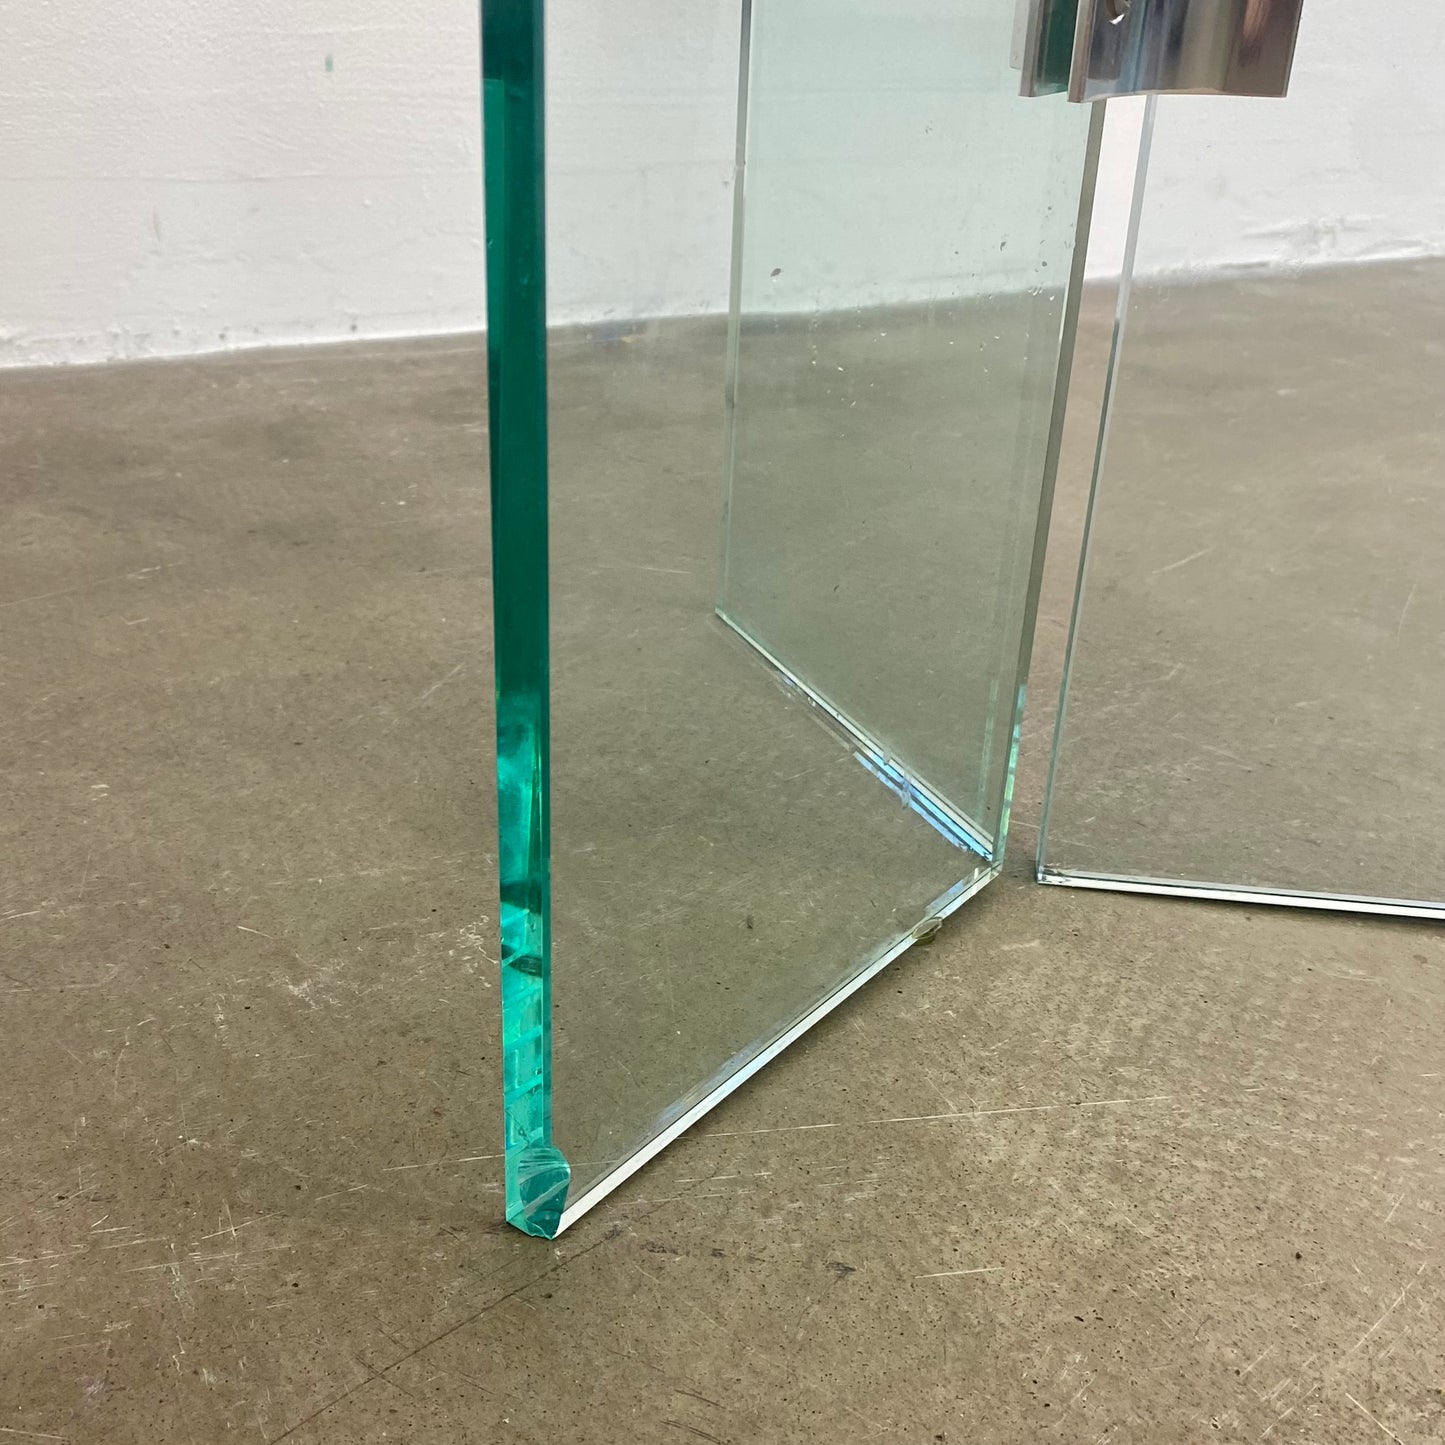 Glass side table / console